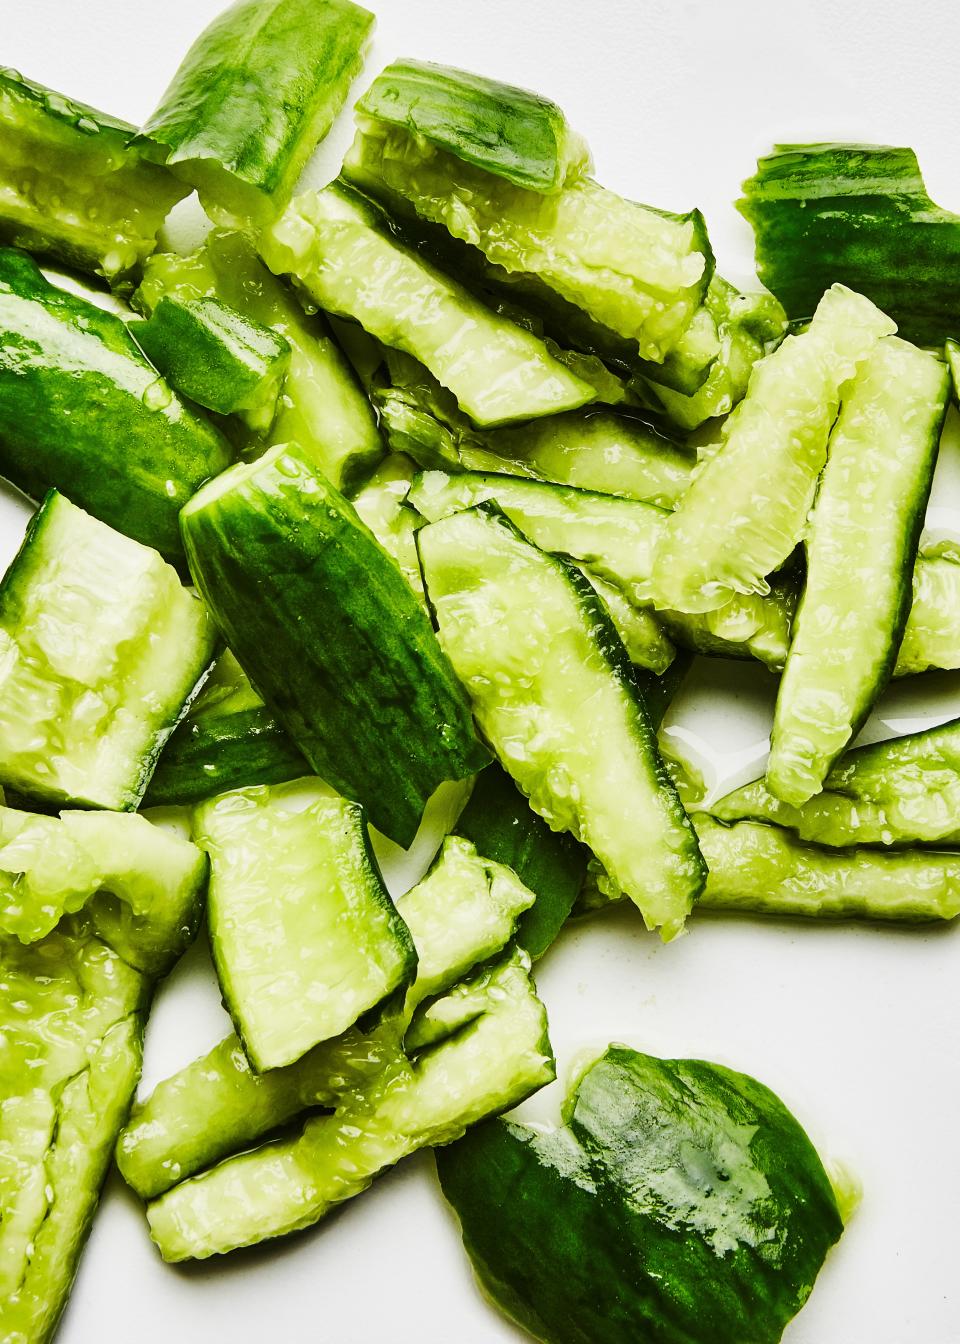 Yes, there are different kinds of cucumbers, and yes, some are better than others.